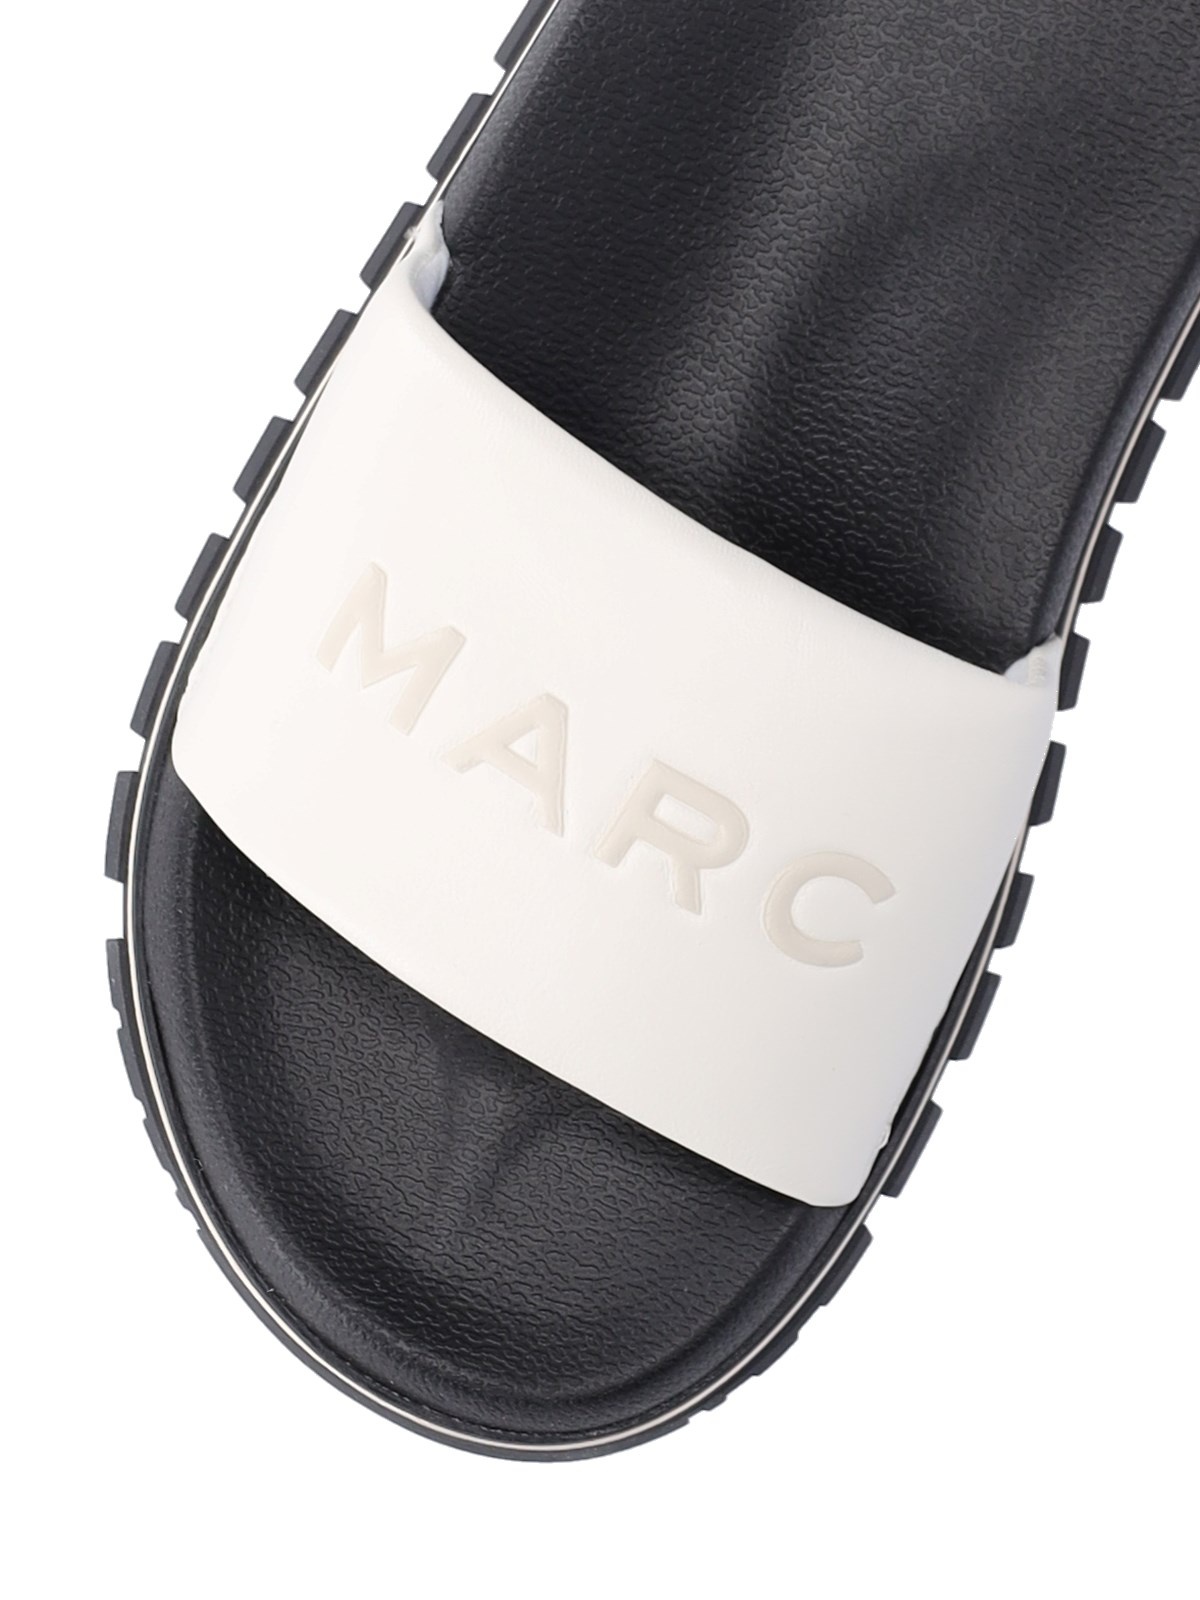 "THE LEATHER" SLIDE SANDALS - 5